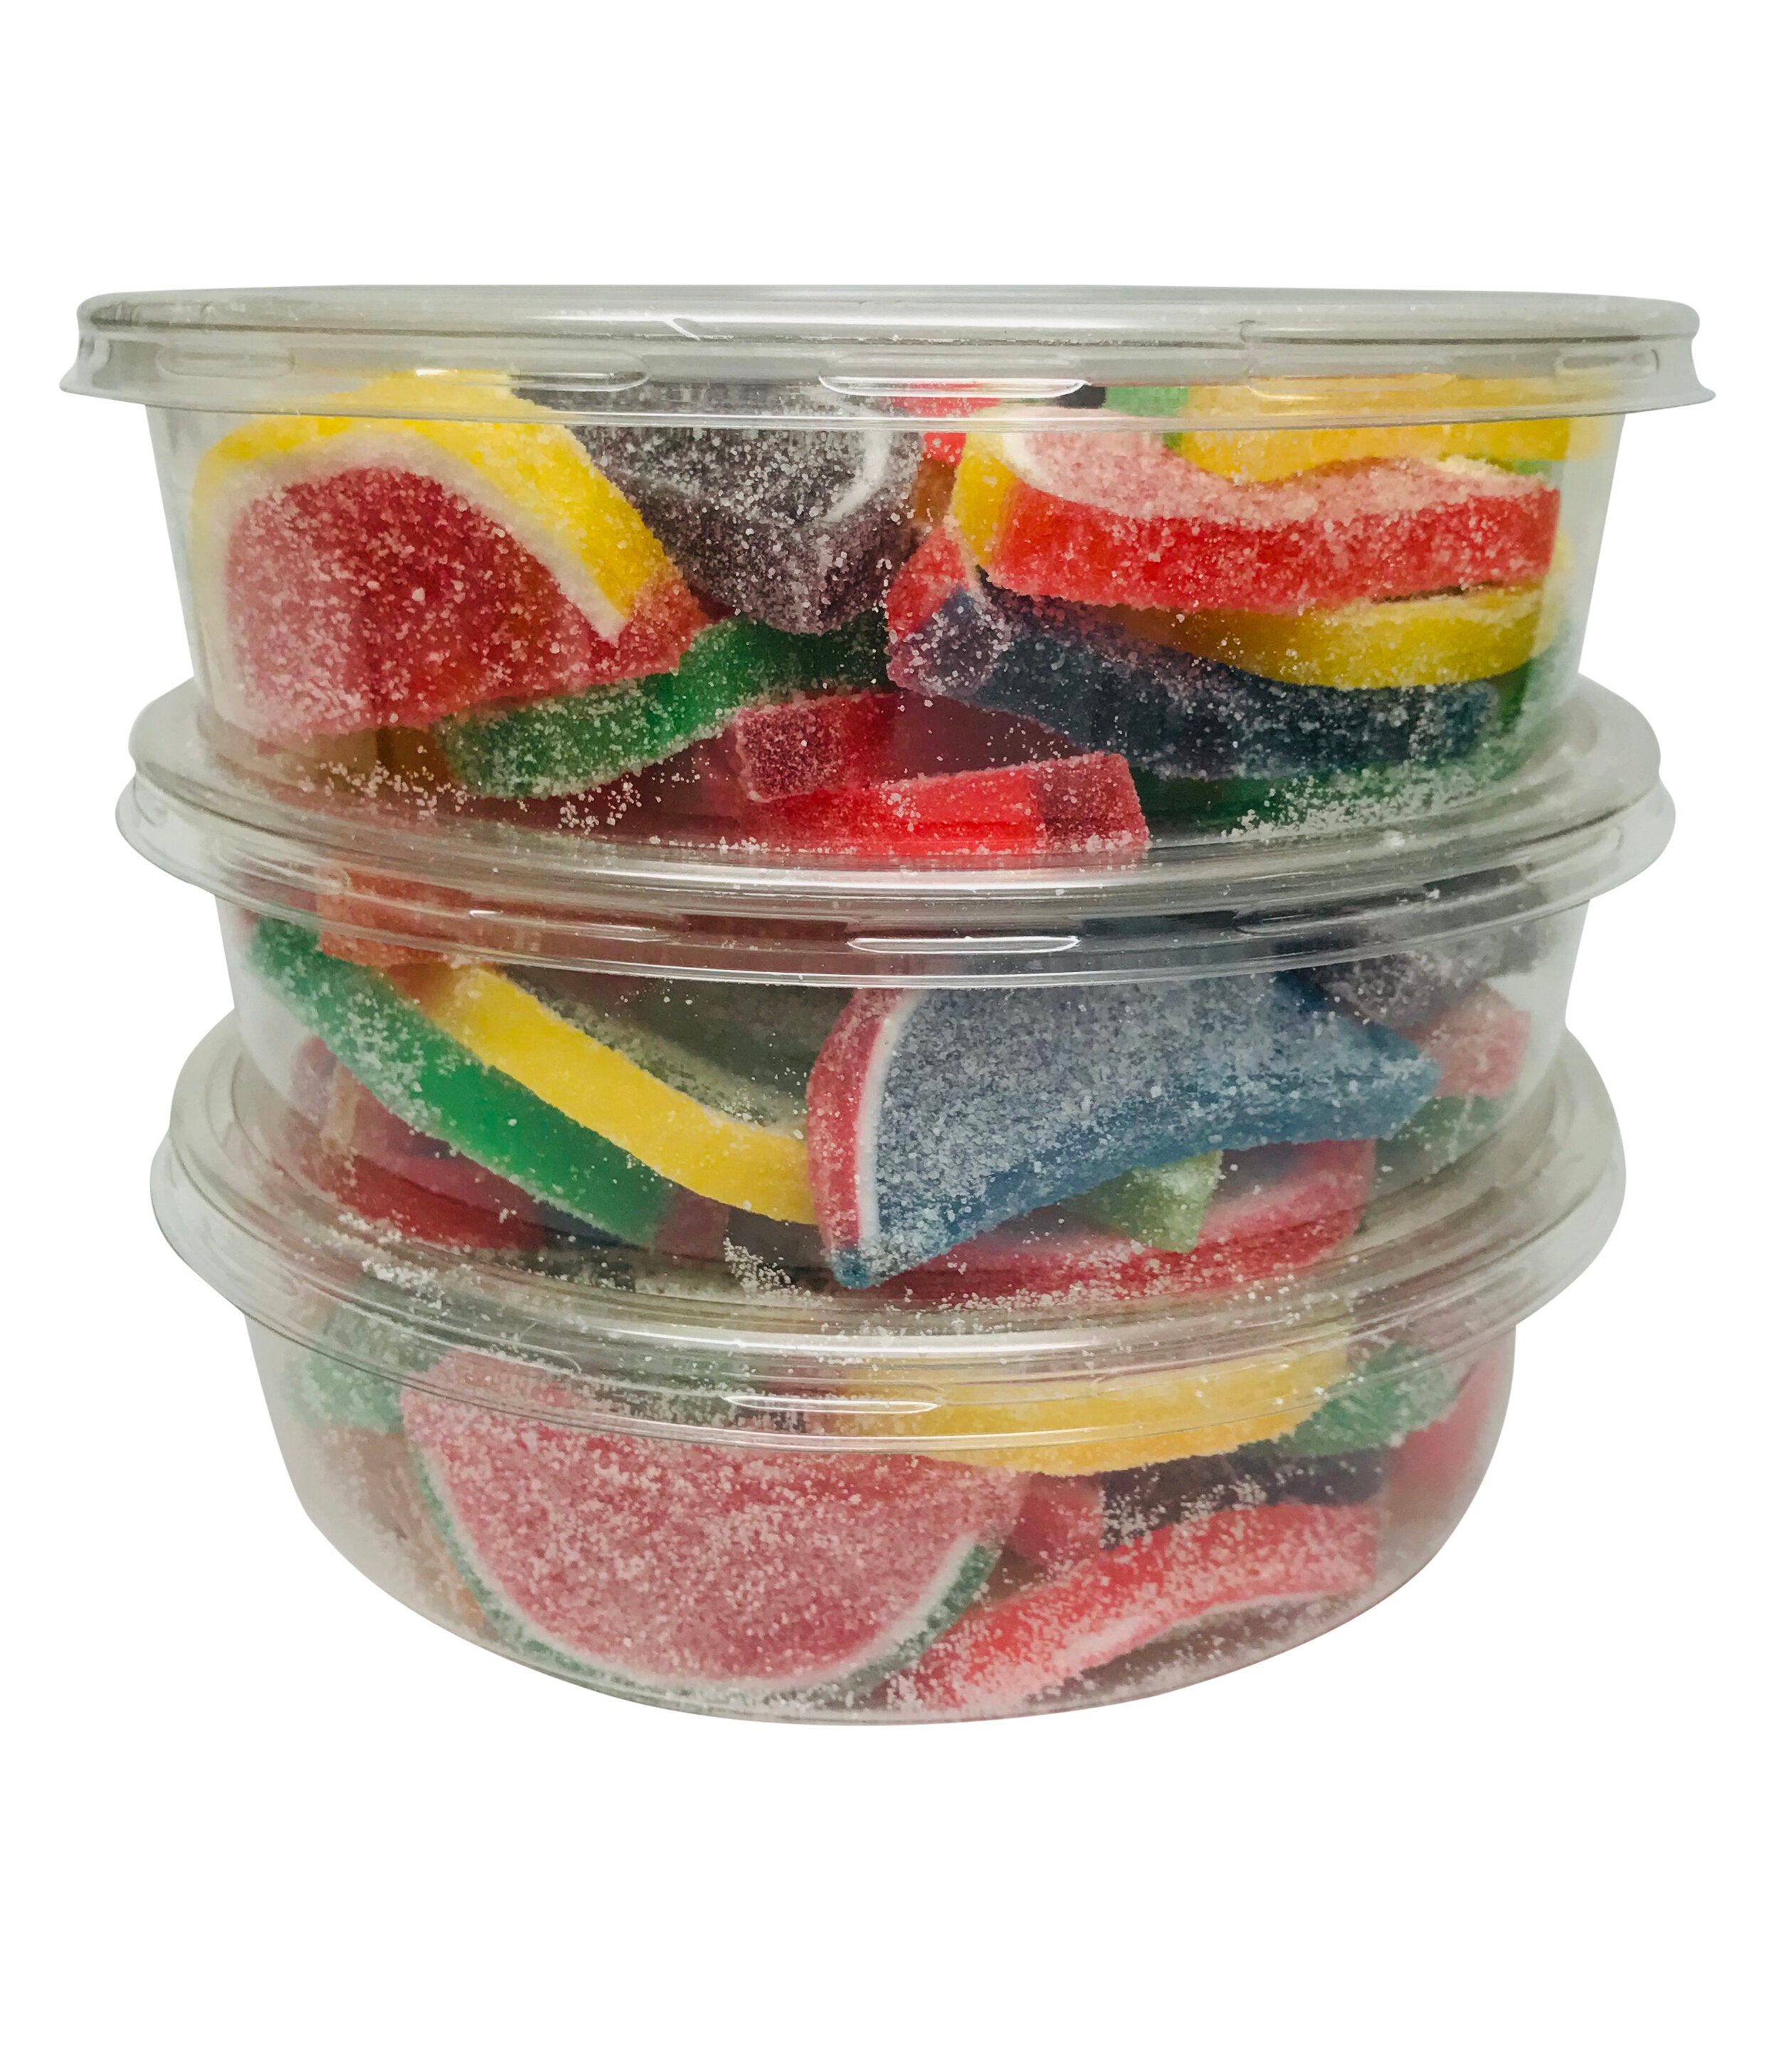 10LB Box Individually Wrapped Fruit Slices - BULK for your store